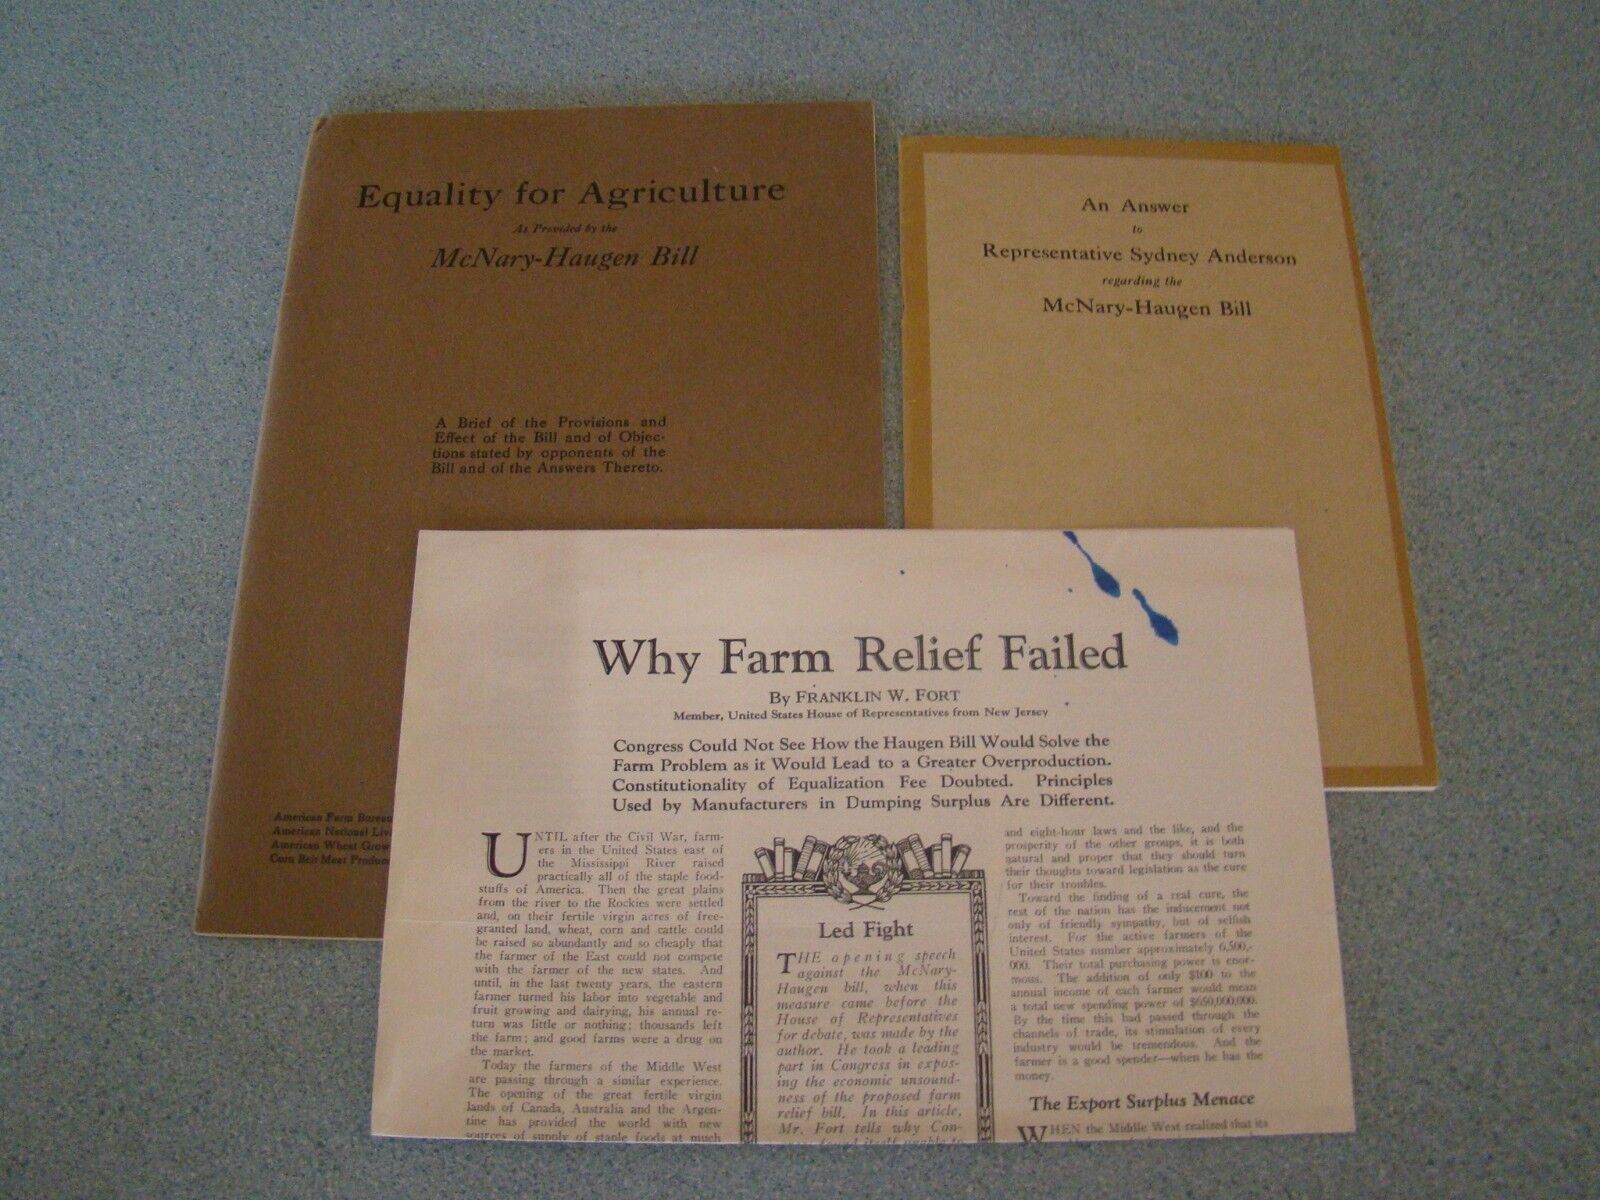 LOT ON MCNARY HAUGEN BILL EQUALITY FOR AGRICULTURE ANALYSIS QUESTIONS ANSWERS